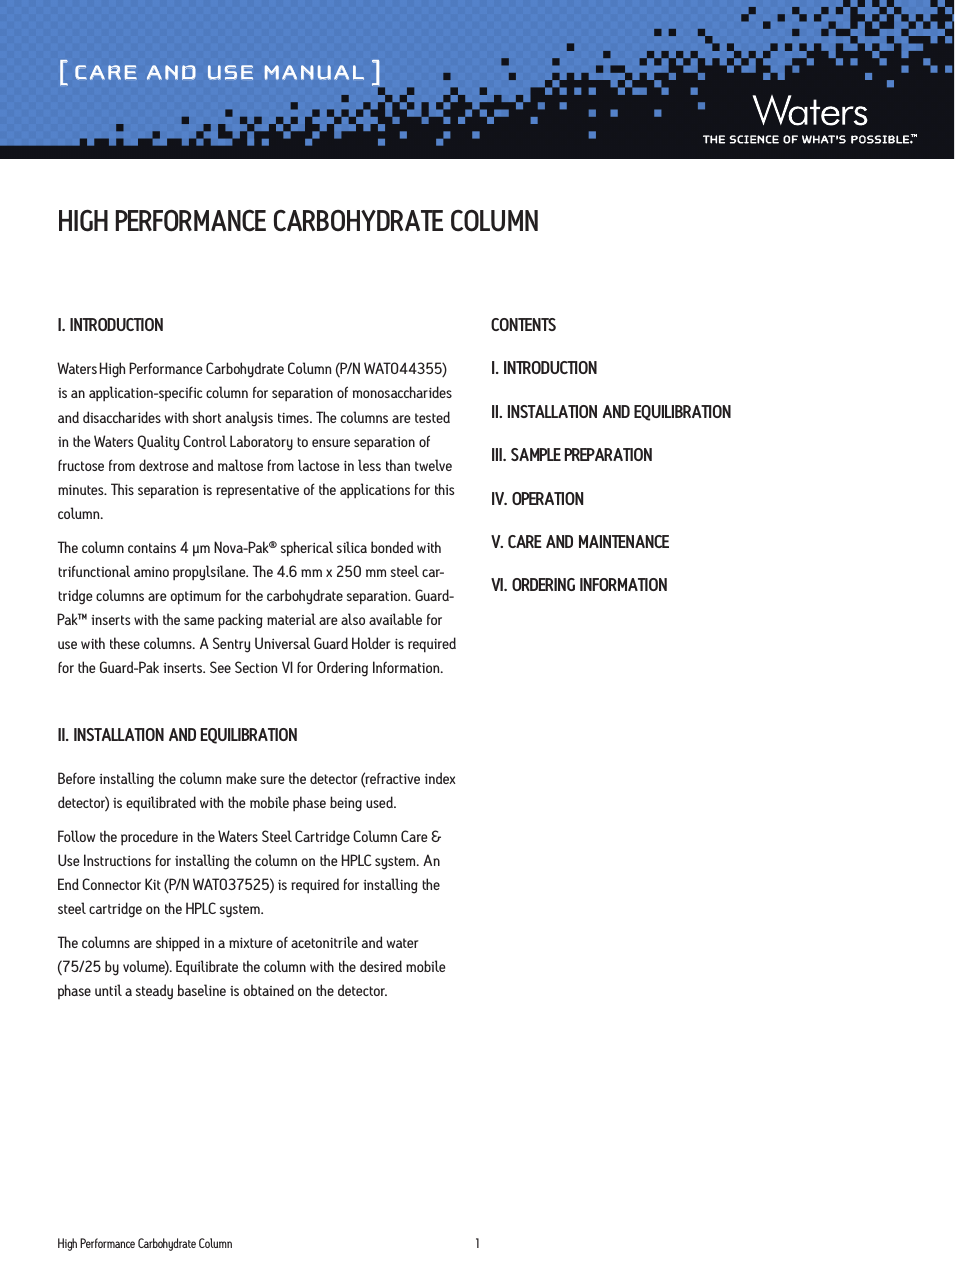 High Performance Carbohydrate Column